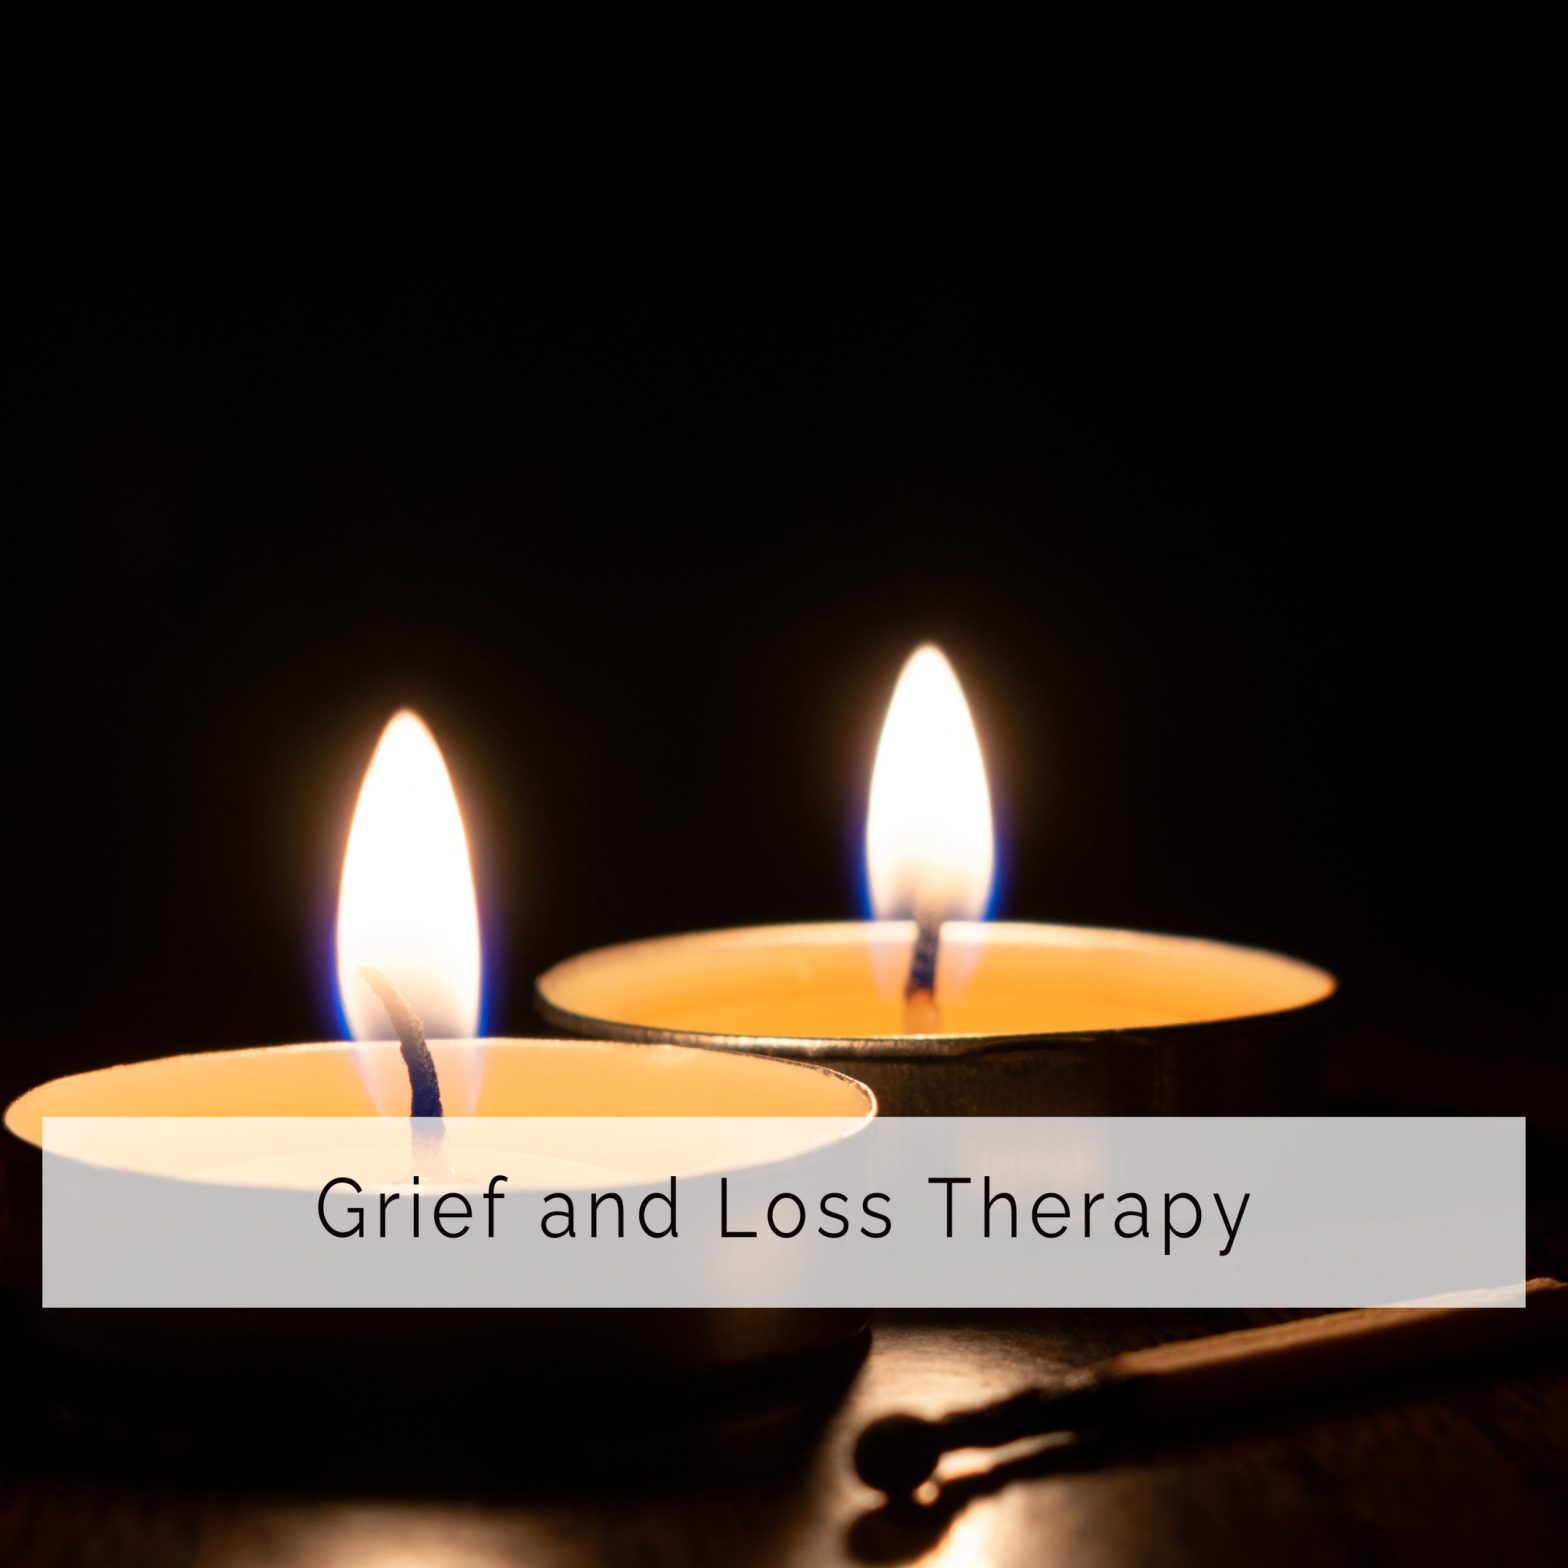 grief and loss therapy seattle bellevue washington